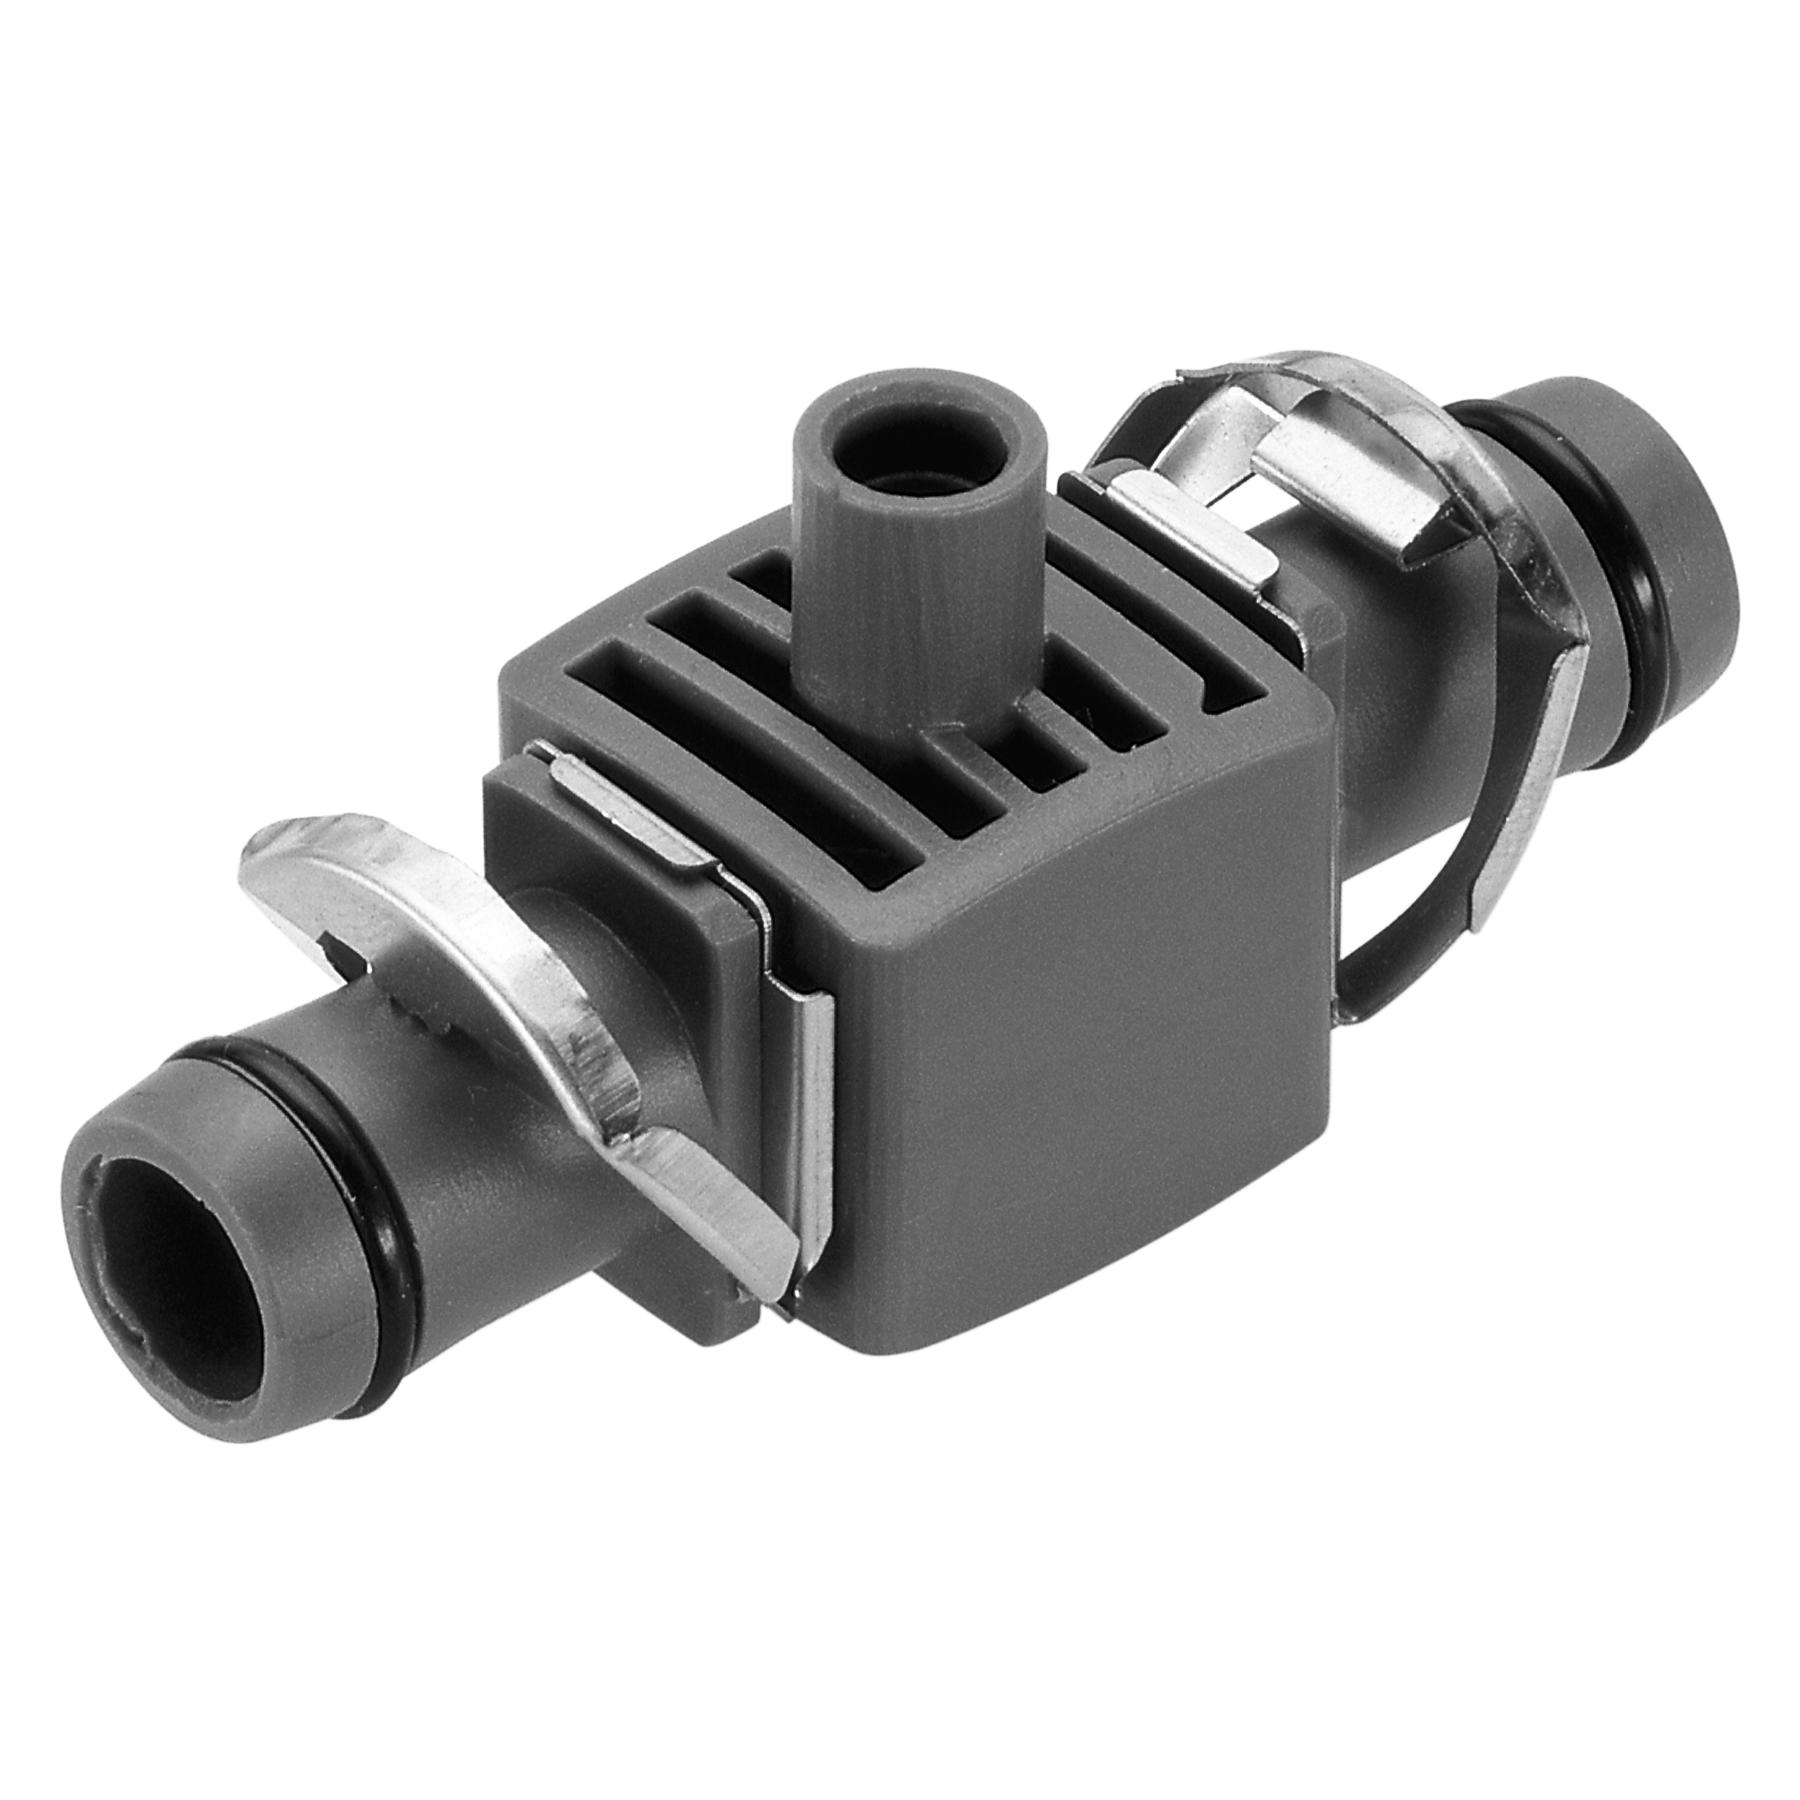 GARDENA T-JOINT FOR SPRAY NOZZLES 13MM (1/2”)